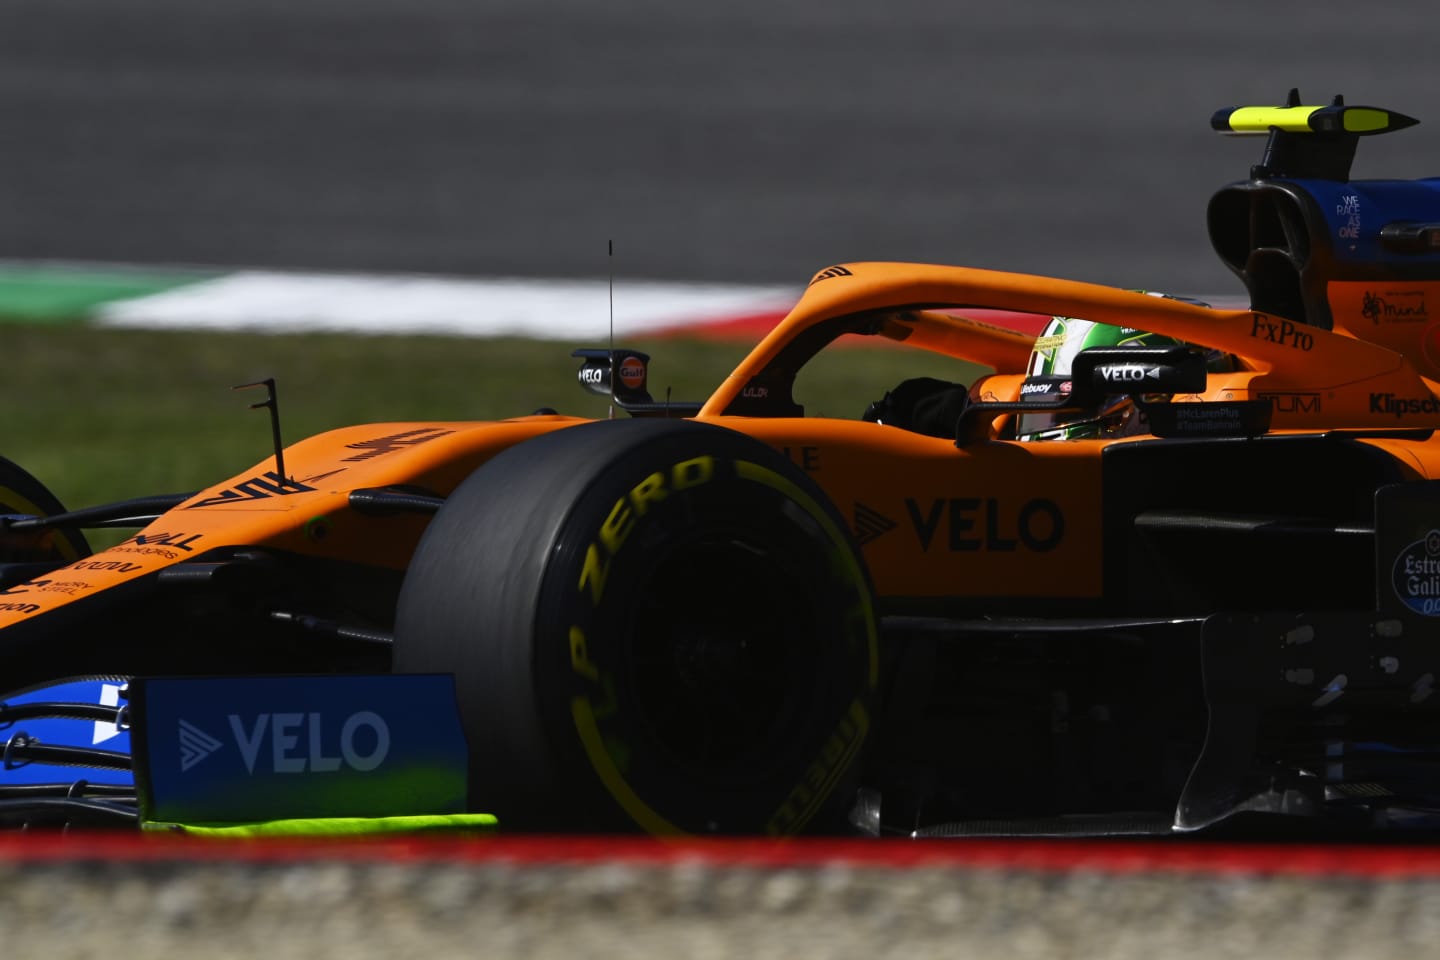 SCARPERIA, ITALY - SEPTEMBER 12: Lando Norris of Great Britain driving the (4) McLaren F1 Team MCL35 Renault on track during final practice ahead of the F1 Grand Prix of Tuscany at Mugello Circuit on September 12, 2020 in Scarperia, Italy. (Photo by Rudy Carezzevoli/Getty Images)